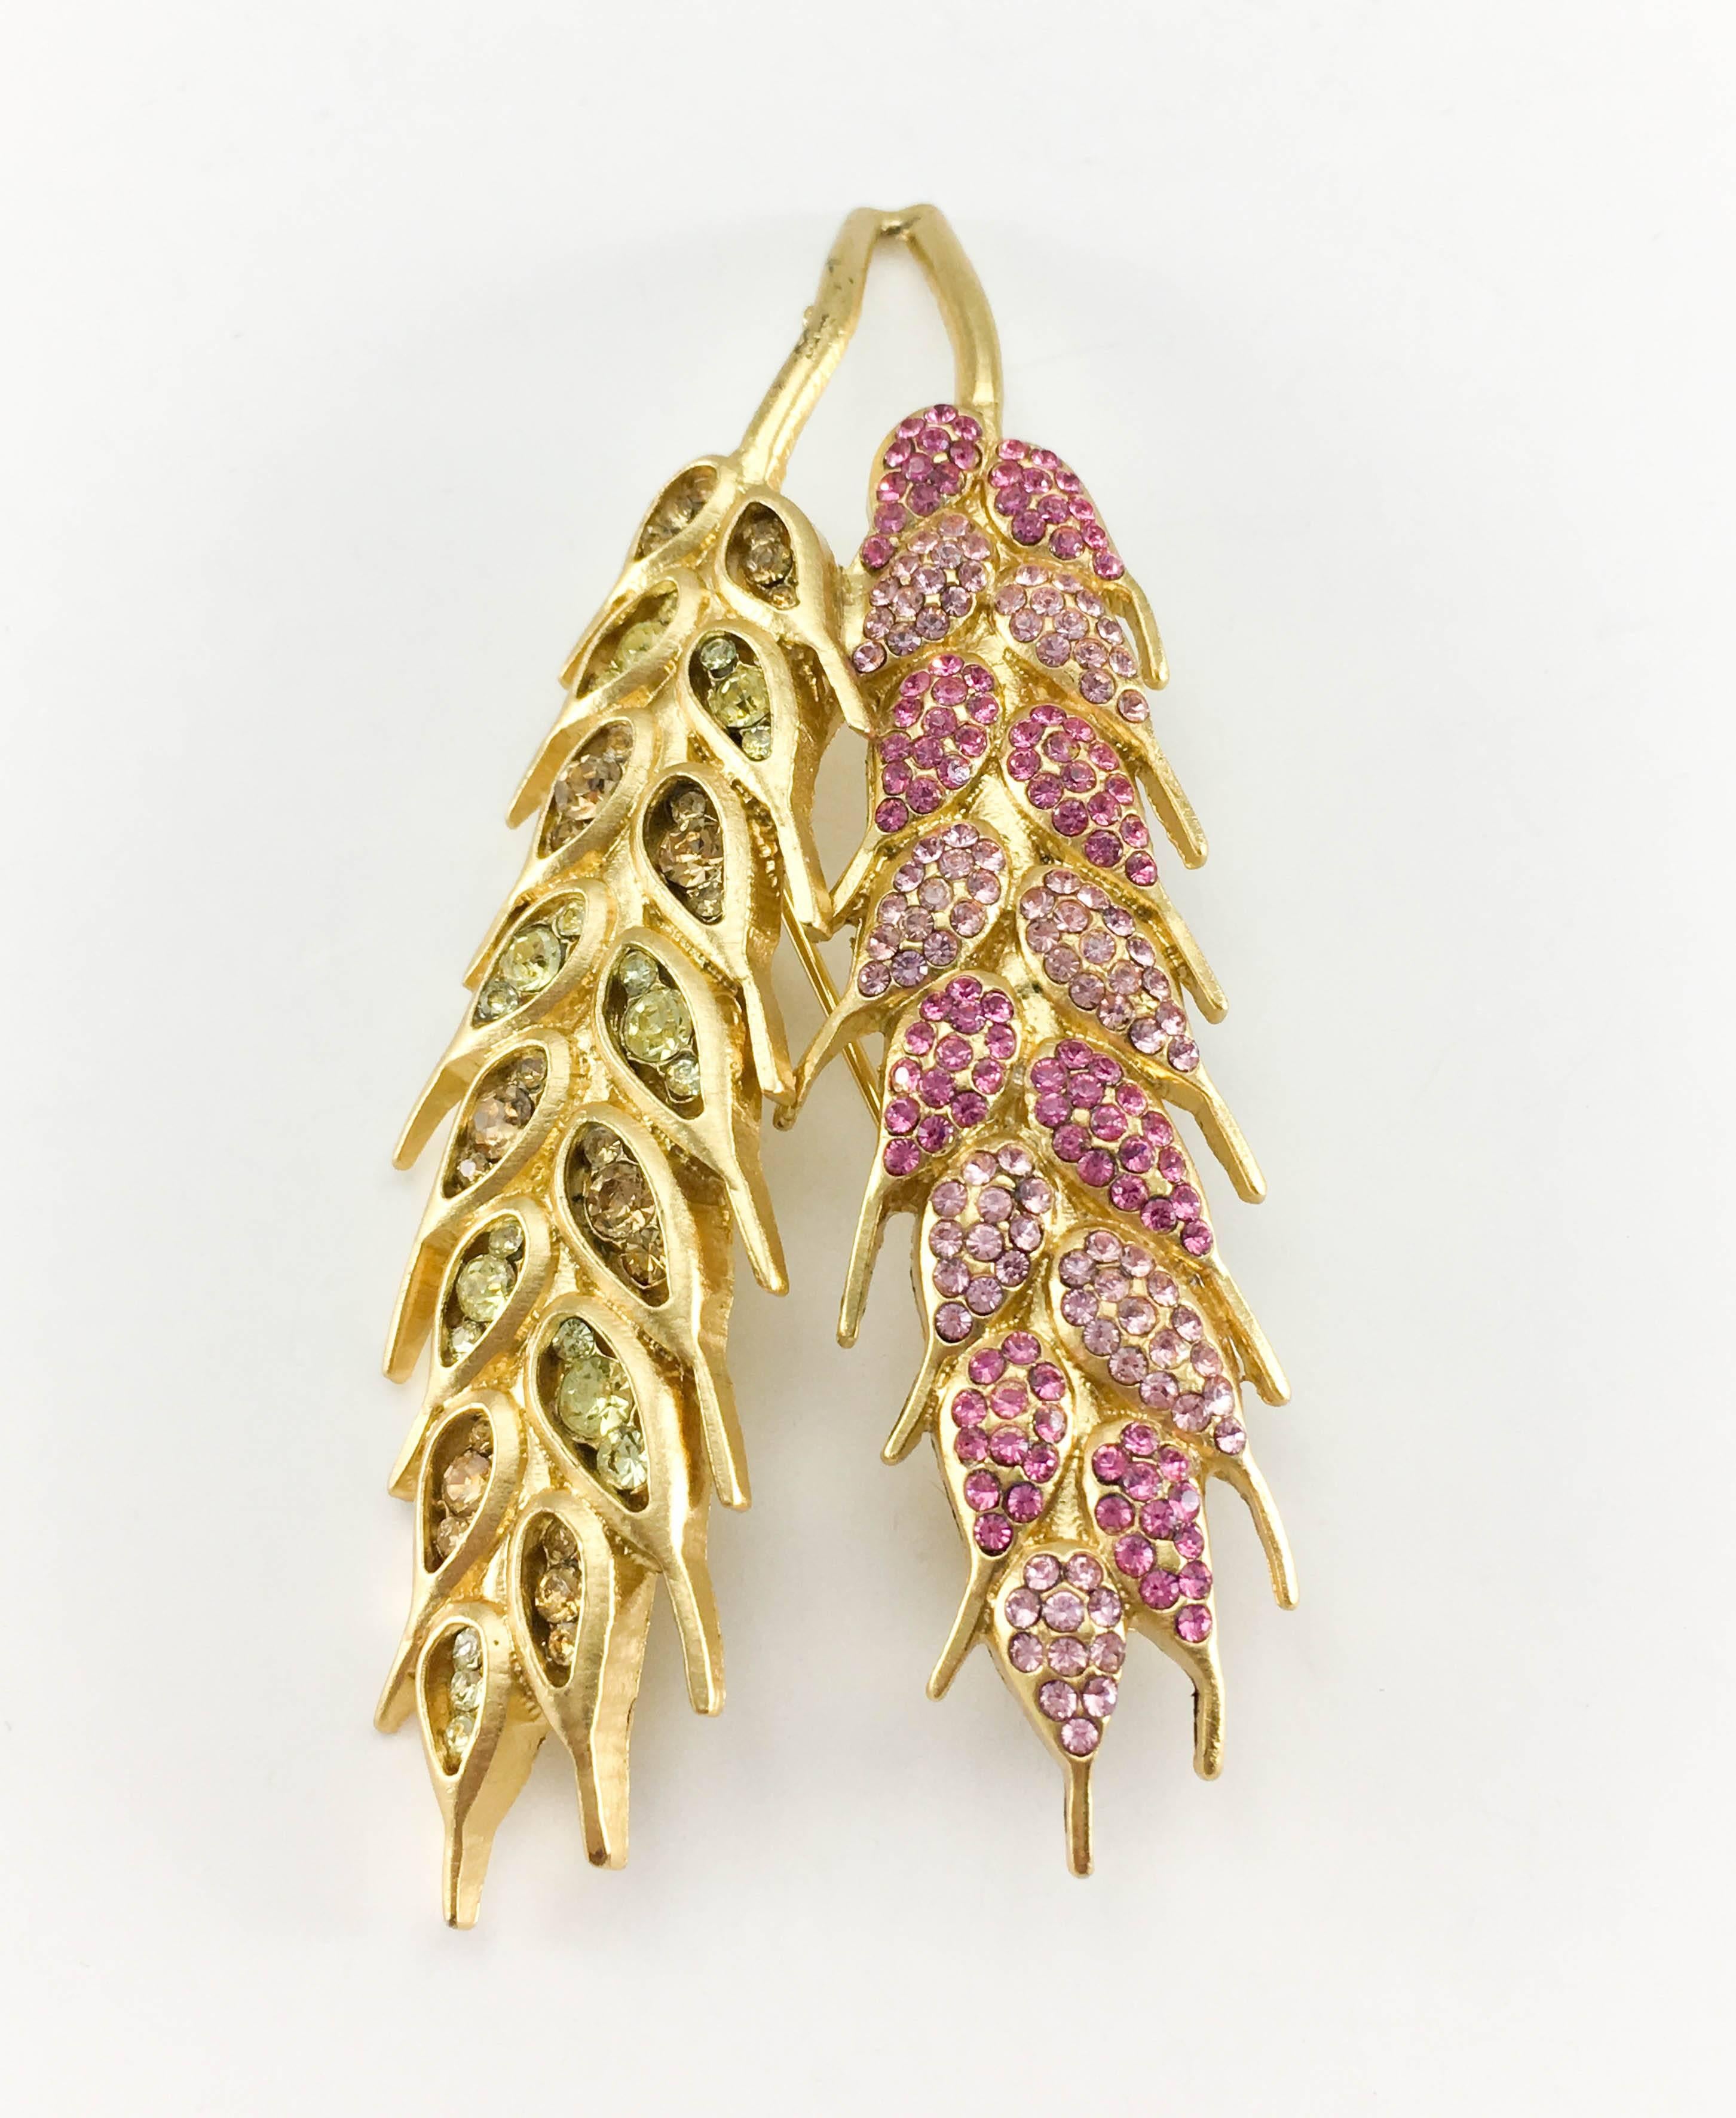  Chanel Pink And Yellow Gold-Plated Wheat Sheaf Brooch, 2003 In Excellent Condition In London, Chelsea